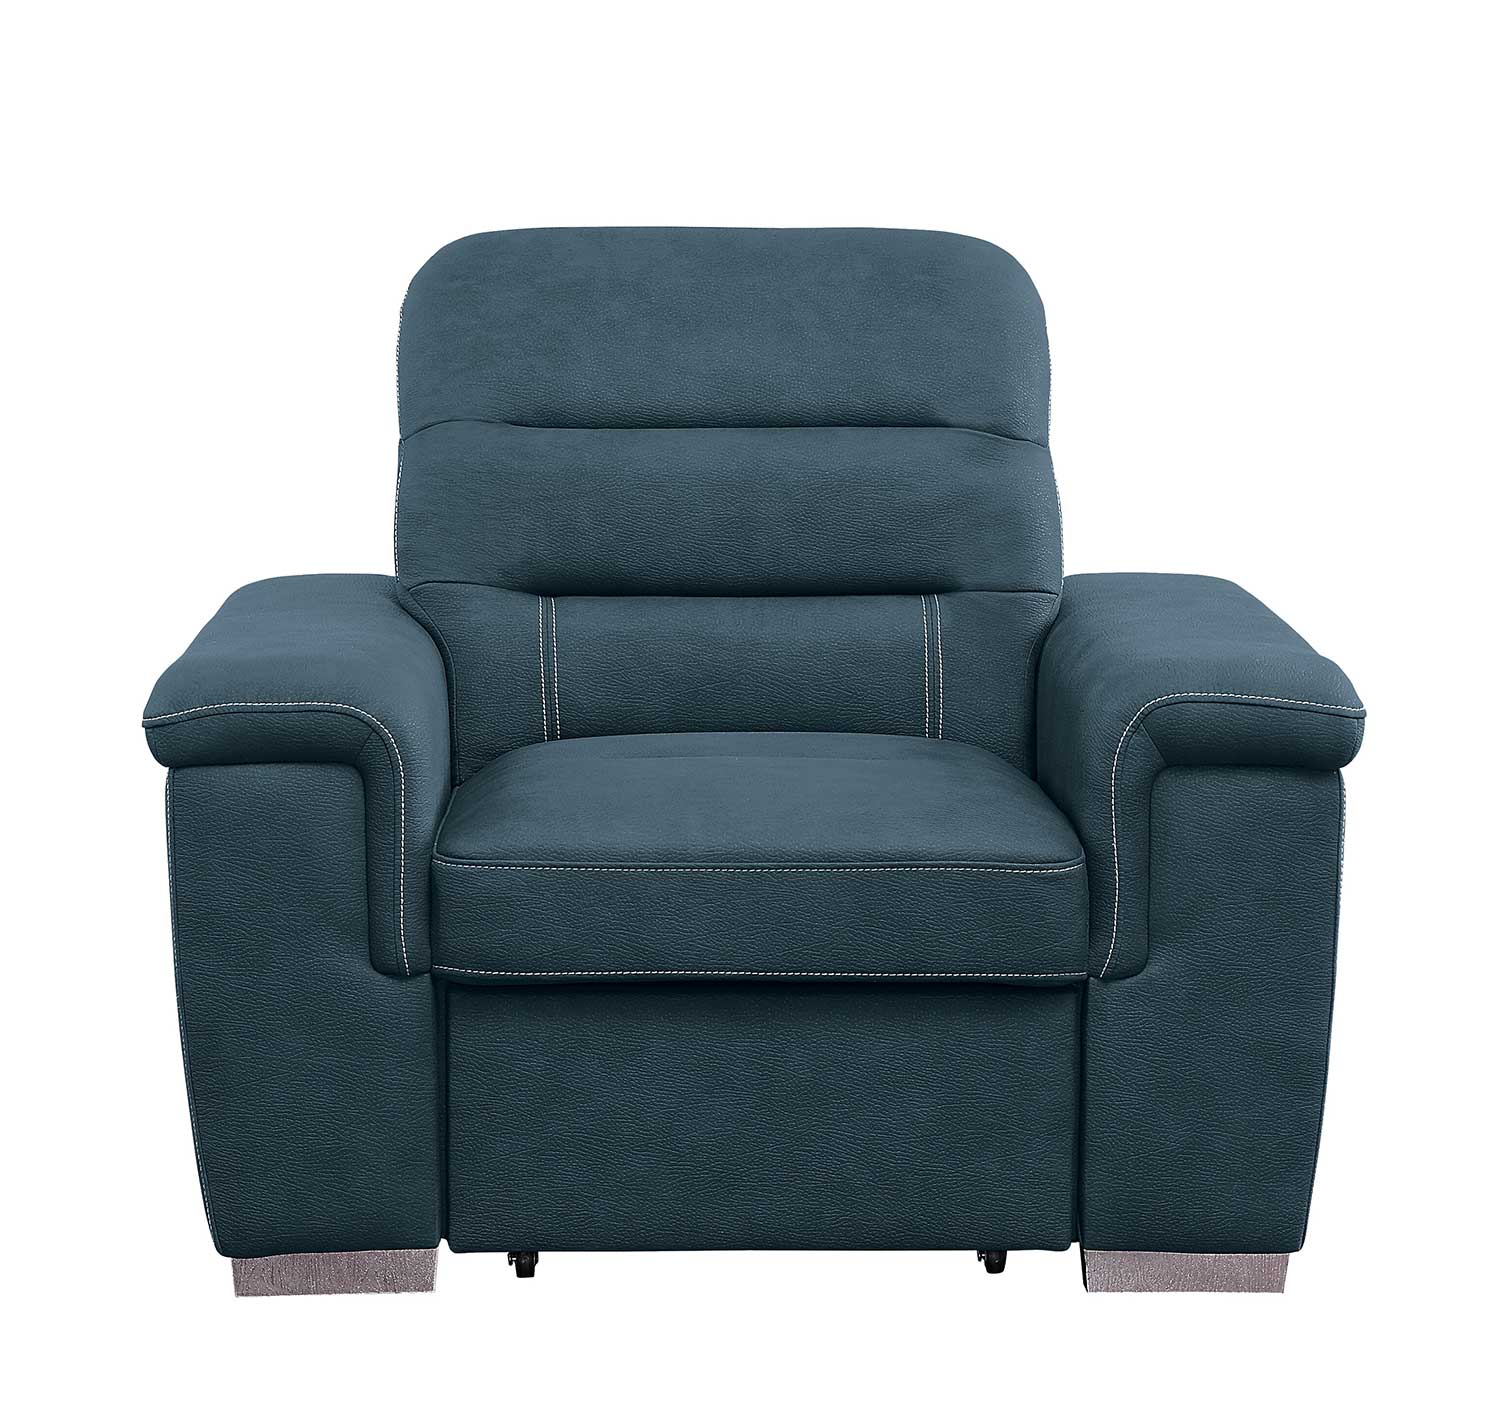 Homelegance Alfio Chair with Pull-out Ottoman - Blue